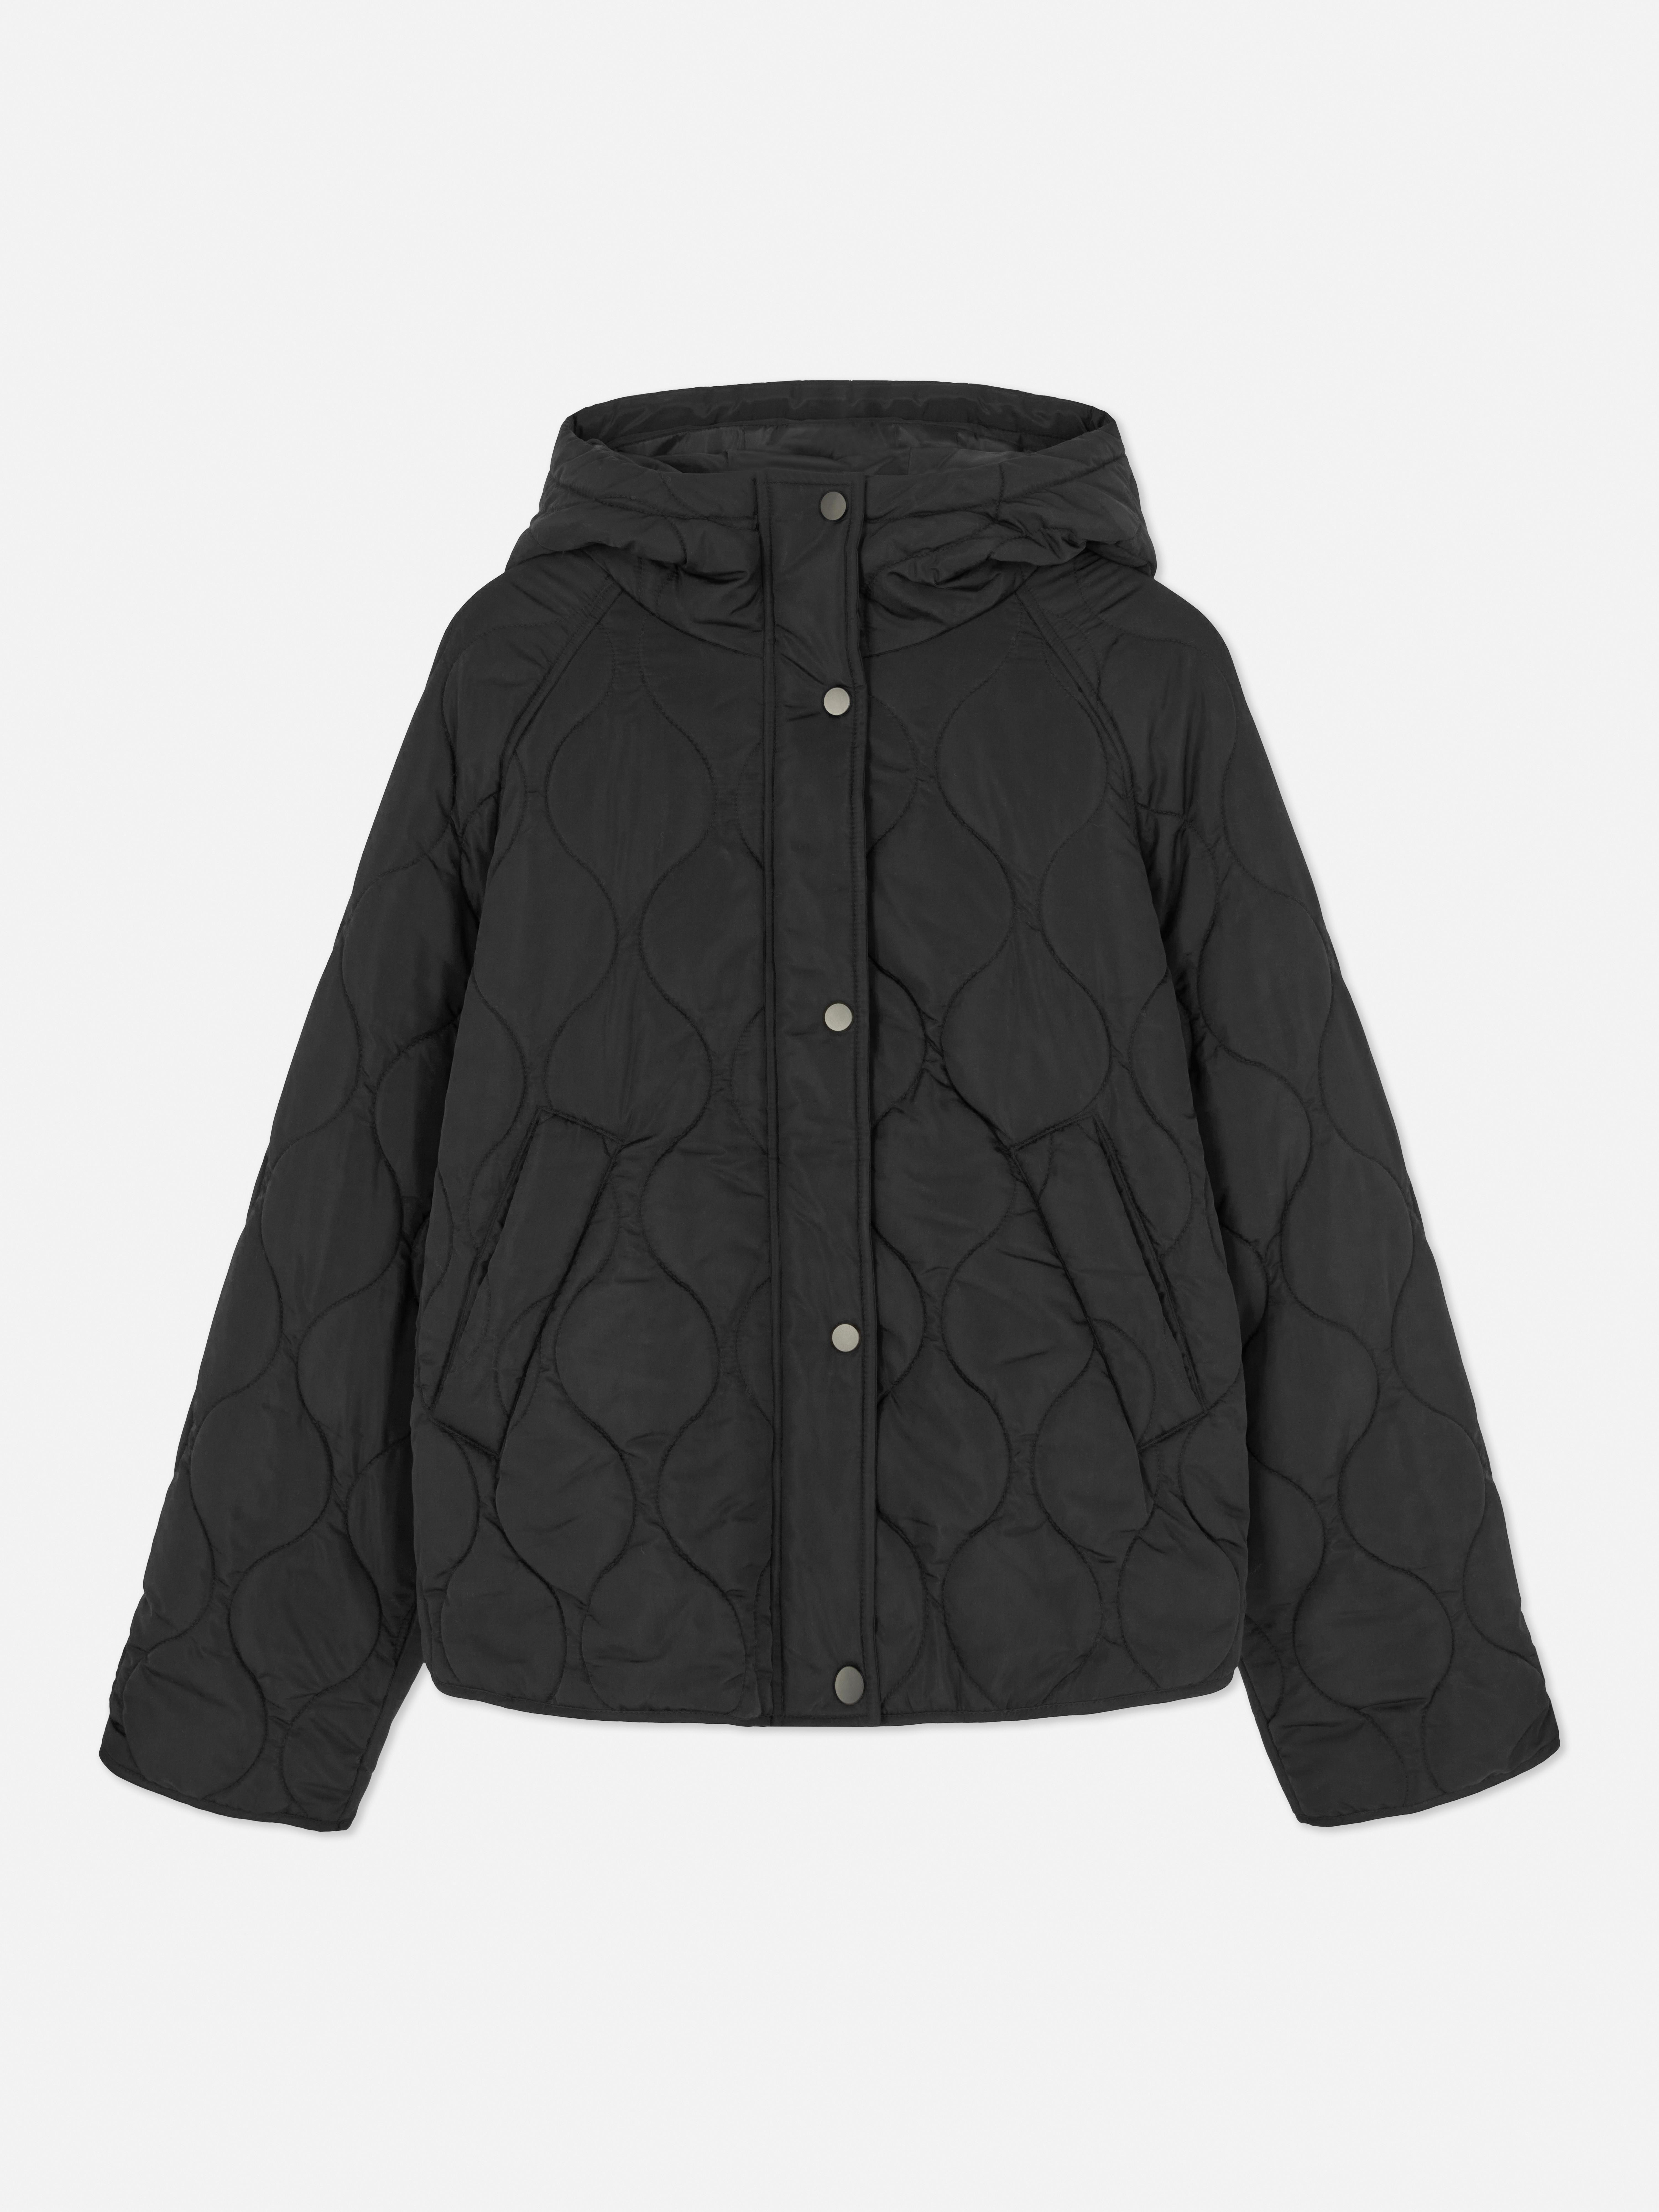 Short Quilted Jacket with Hood | Women's Jackets & Coats | Women's ...